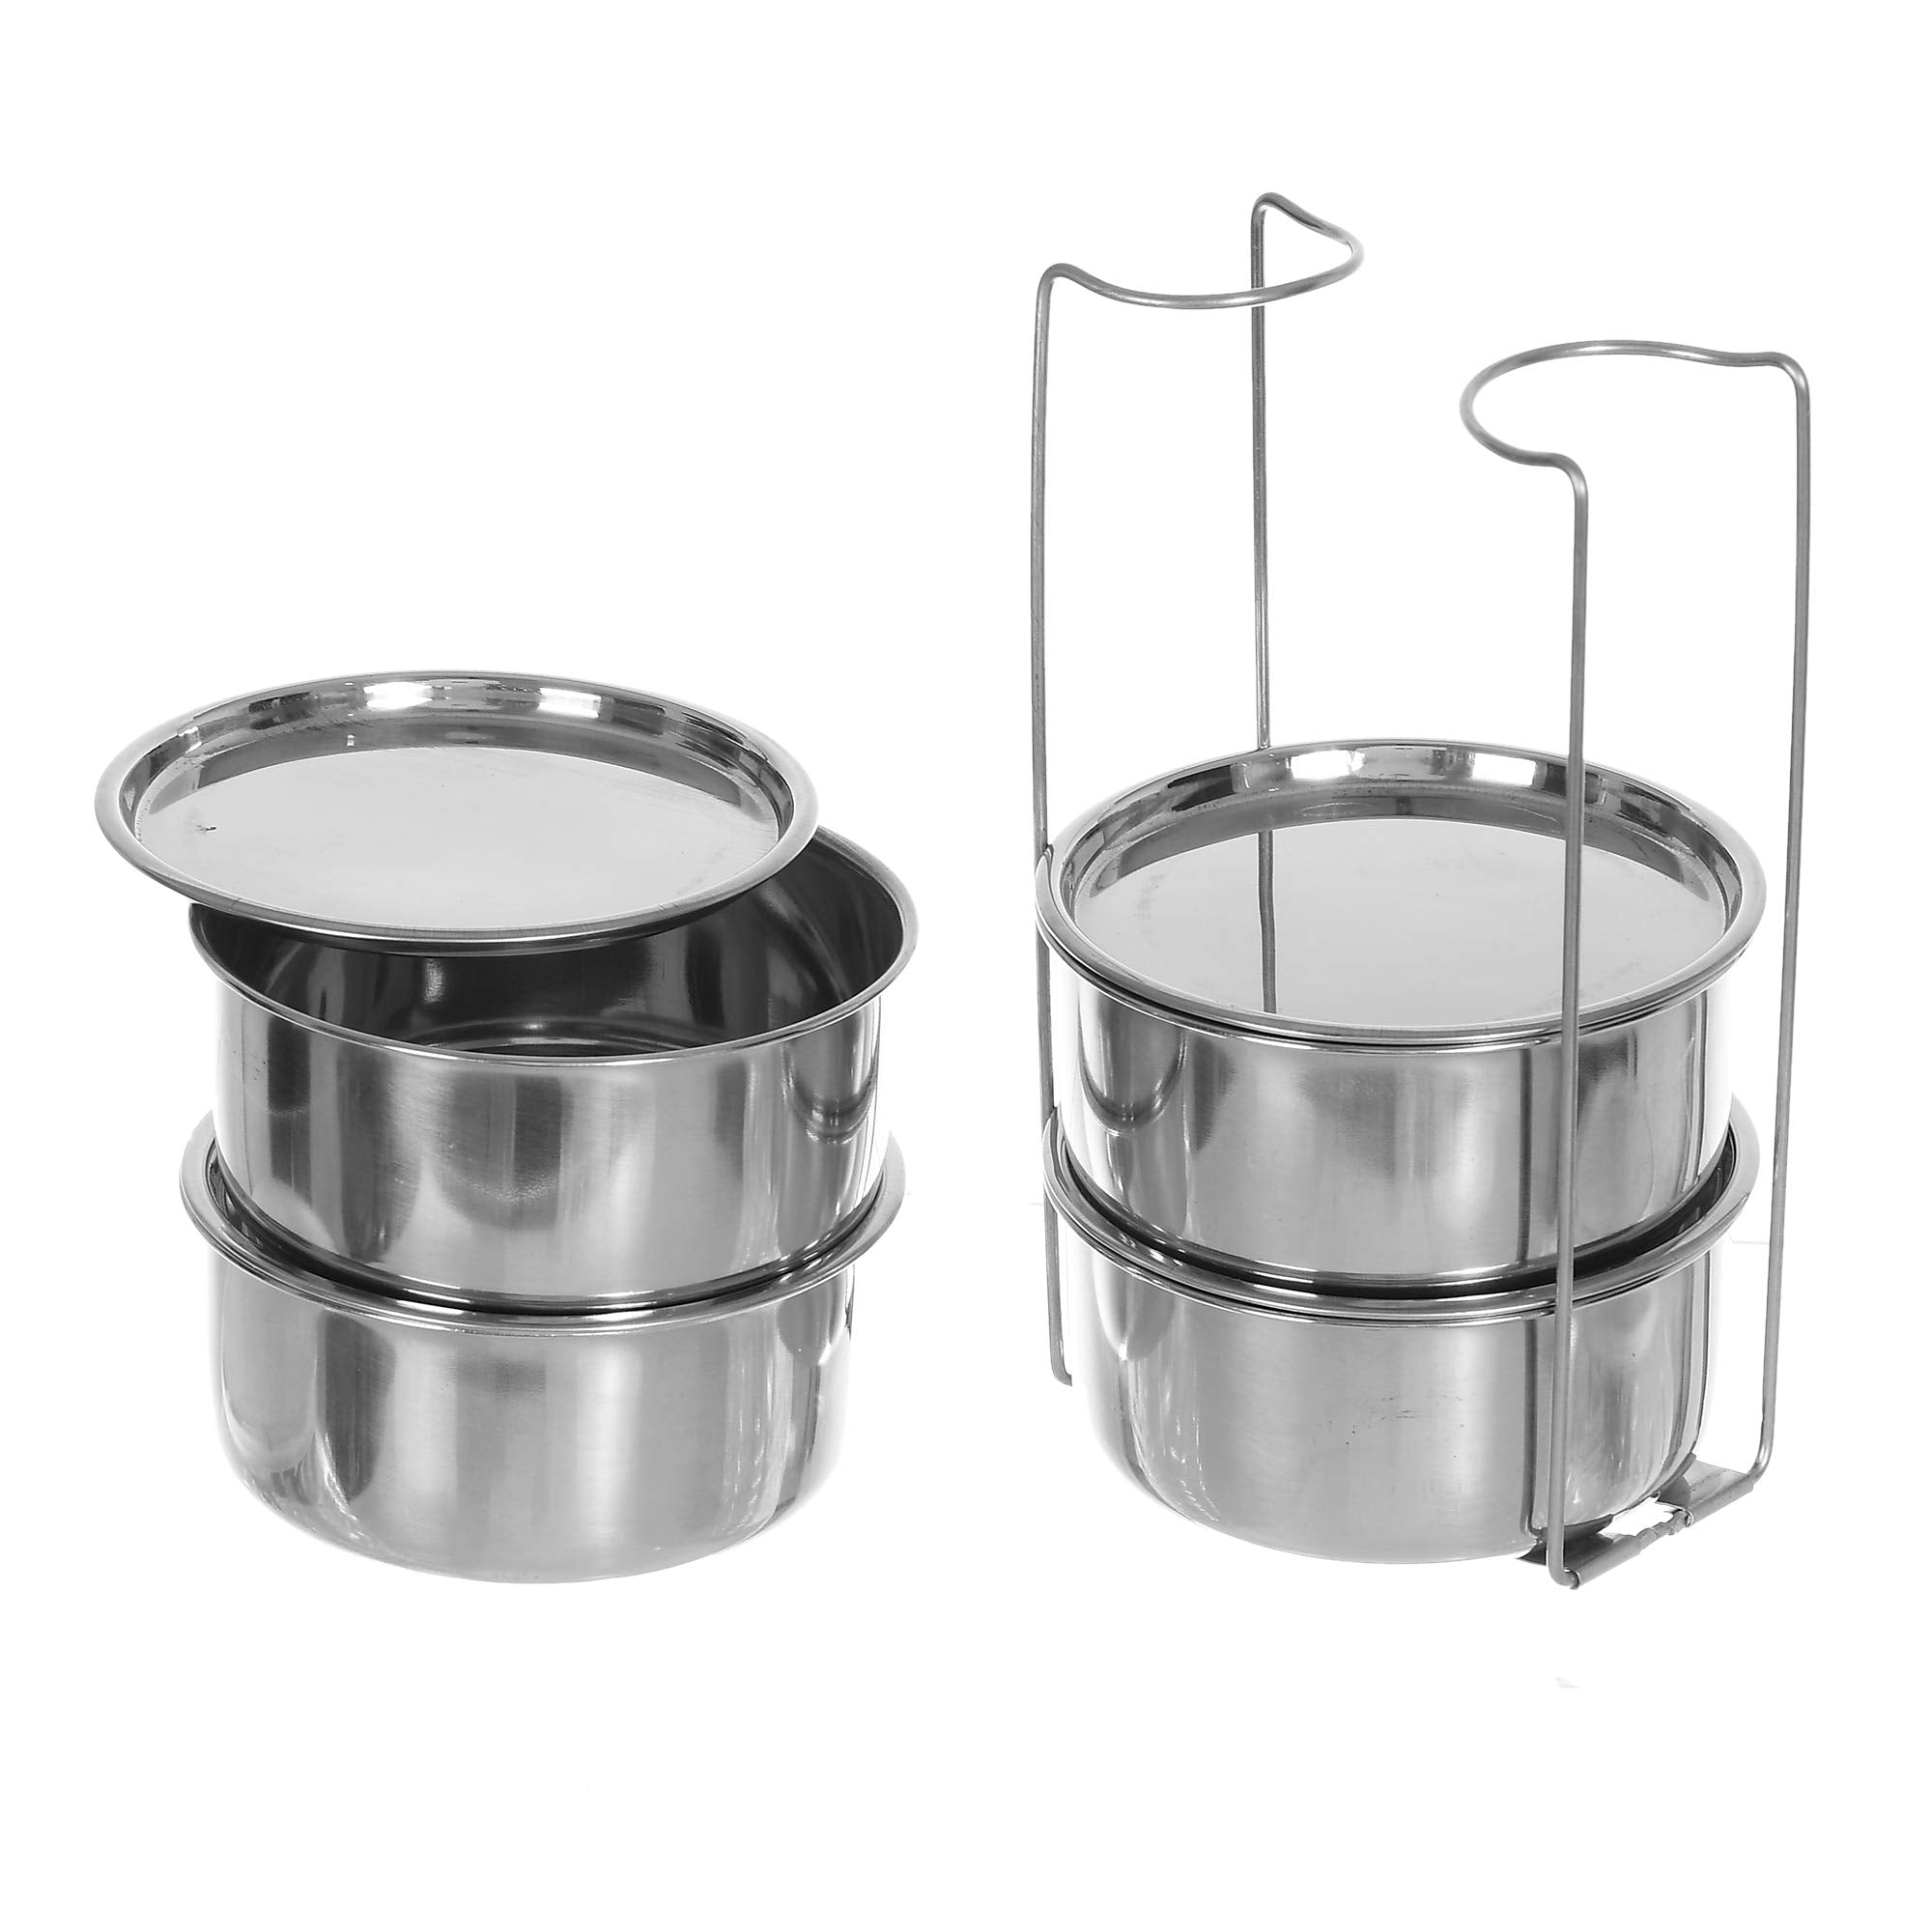 Heart Home 4 Inner Stainless Steel Tiffin Box for Office, School, College and Travelling (Cream)-HHEART15293, Standard